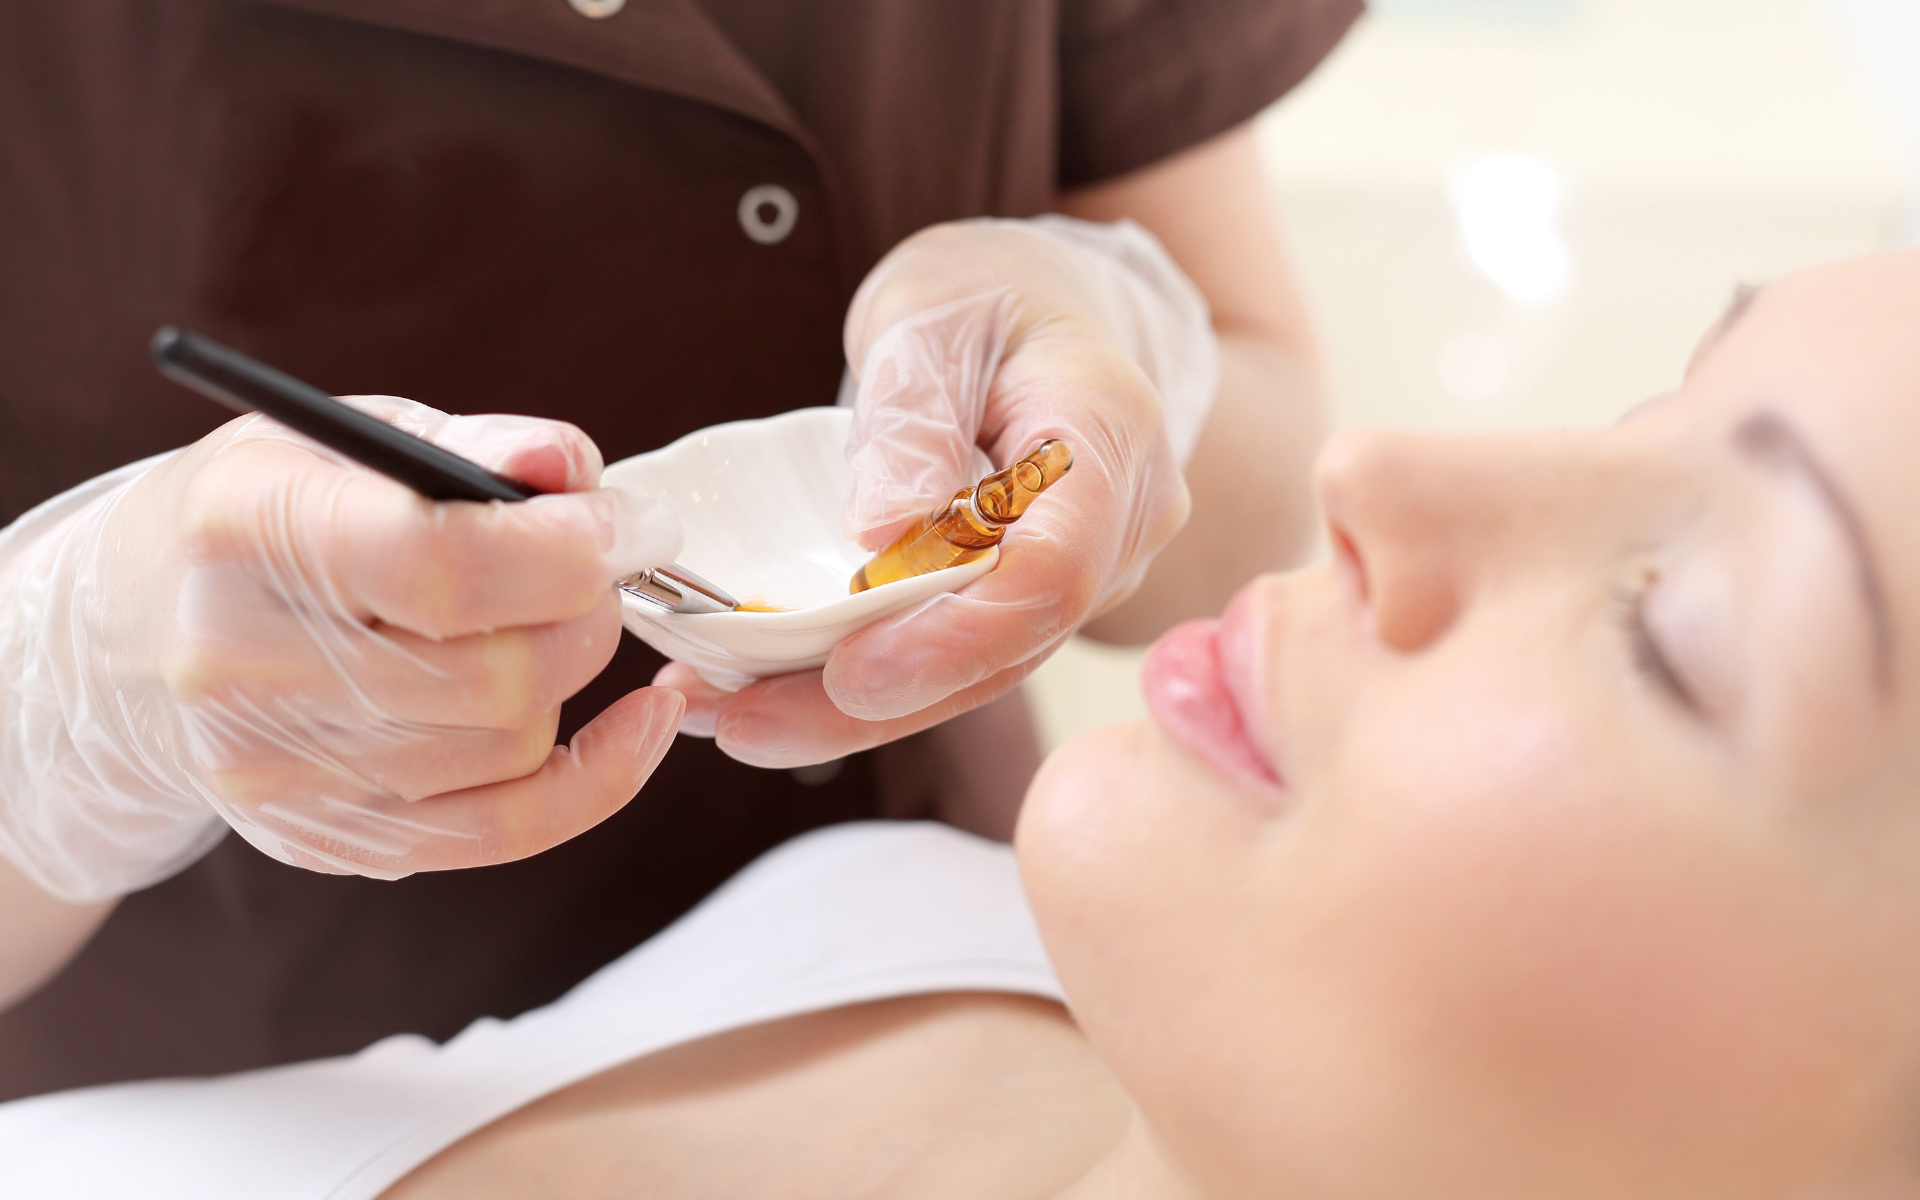 An image of a specialist getting ready to give a woman a chemical peel treatment on her face.